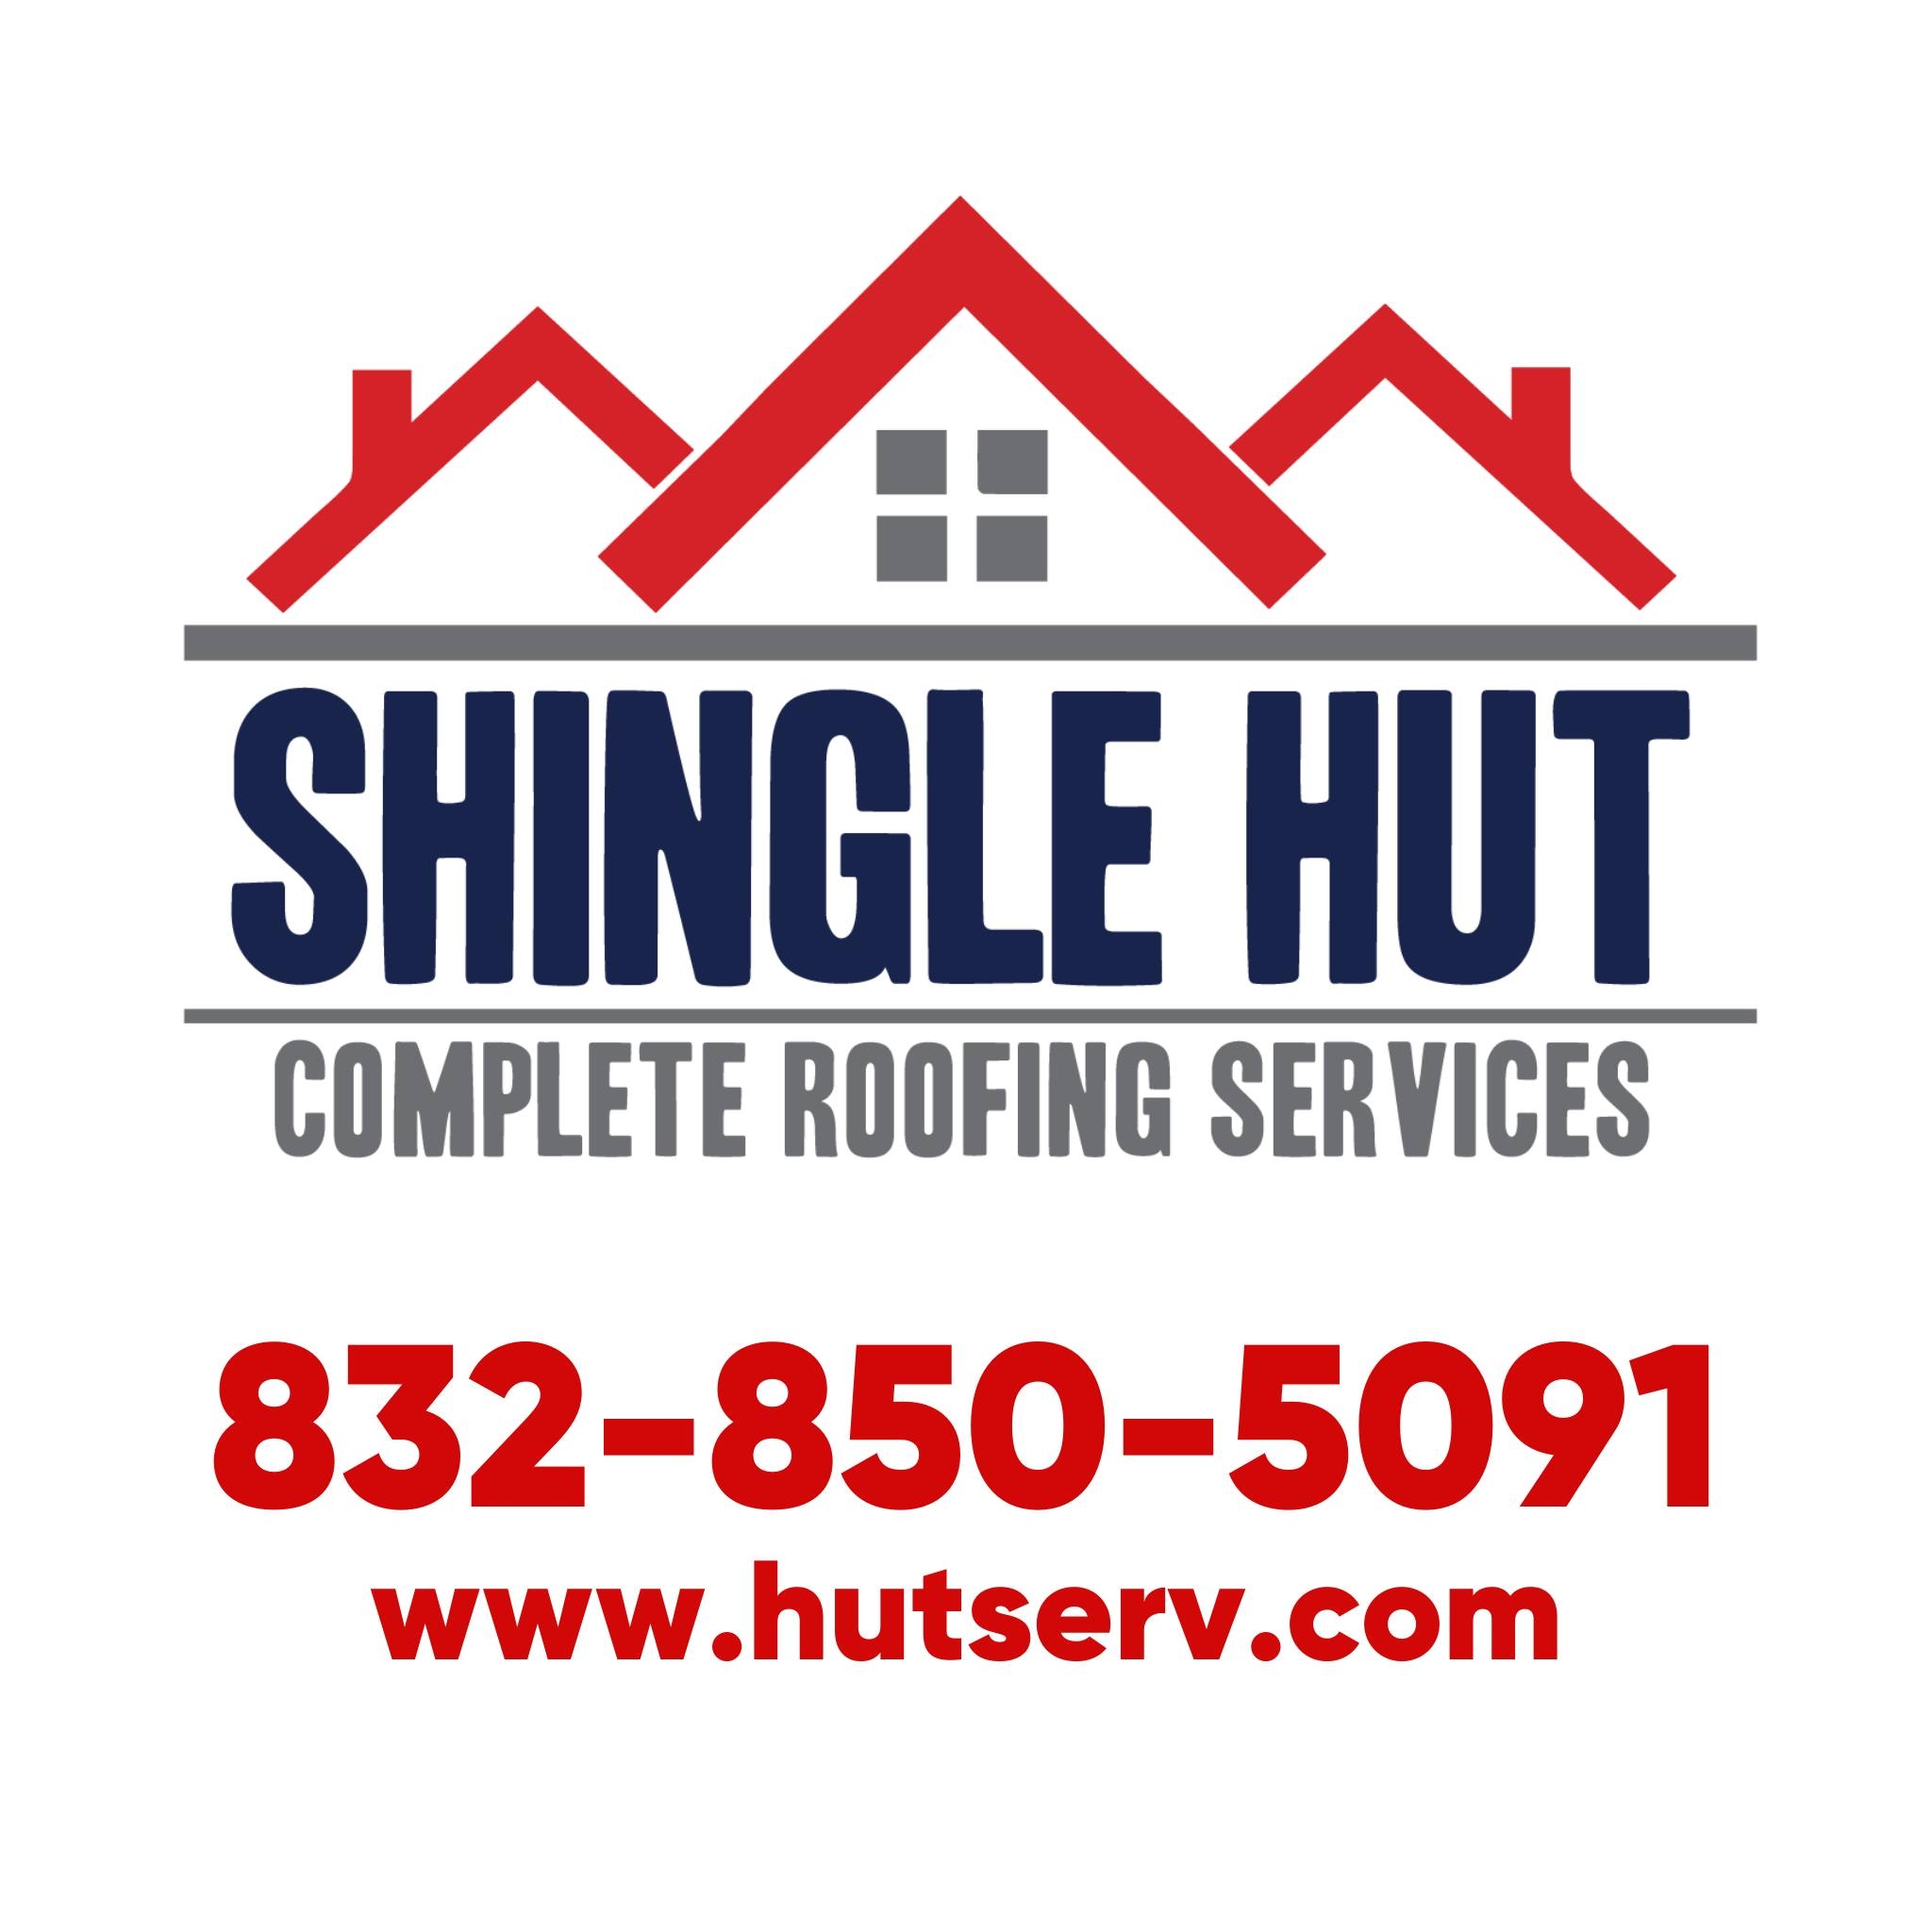 Shingle Hut Complete Roofing Services